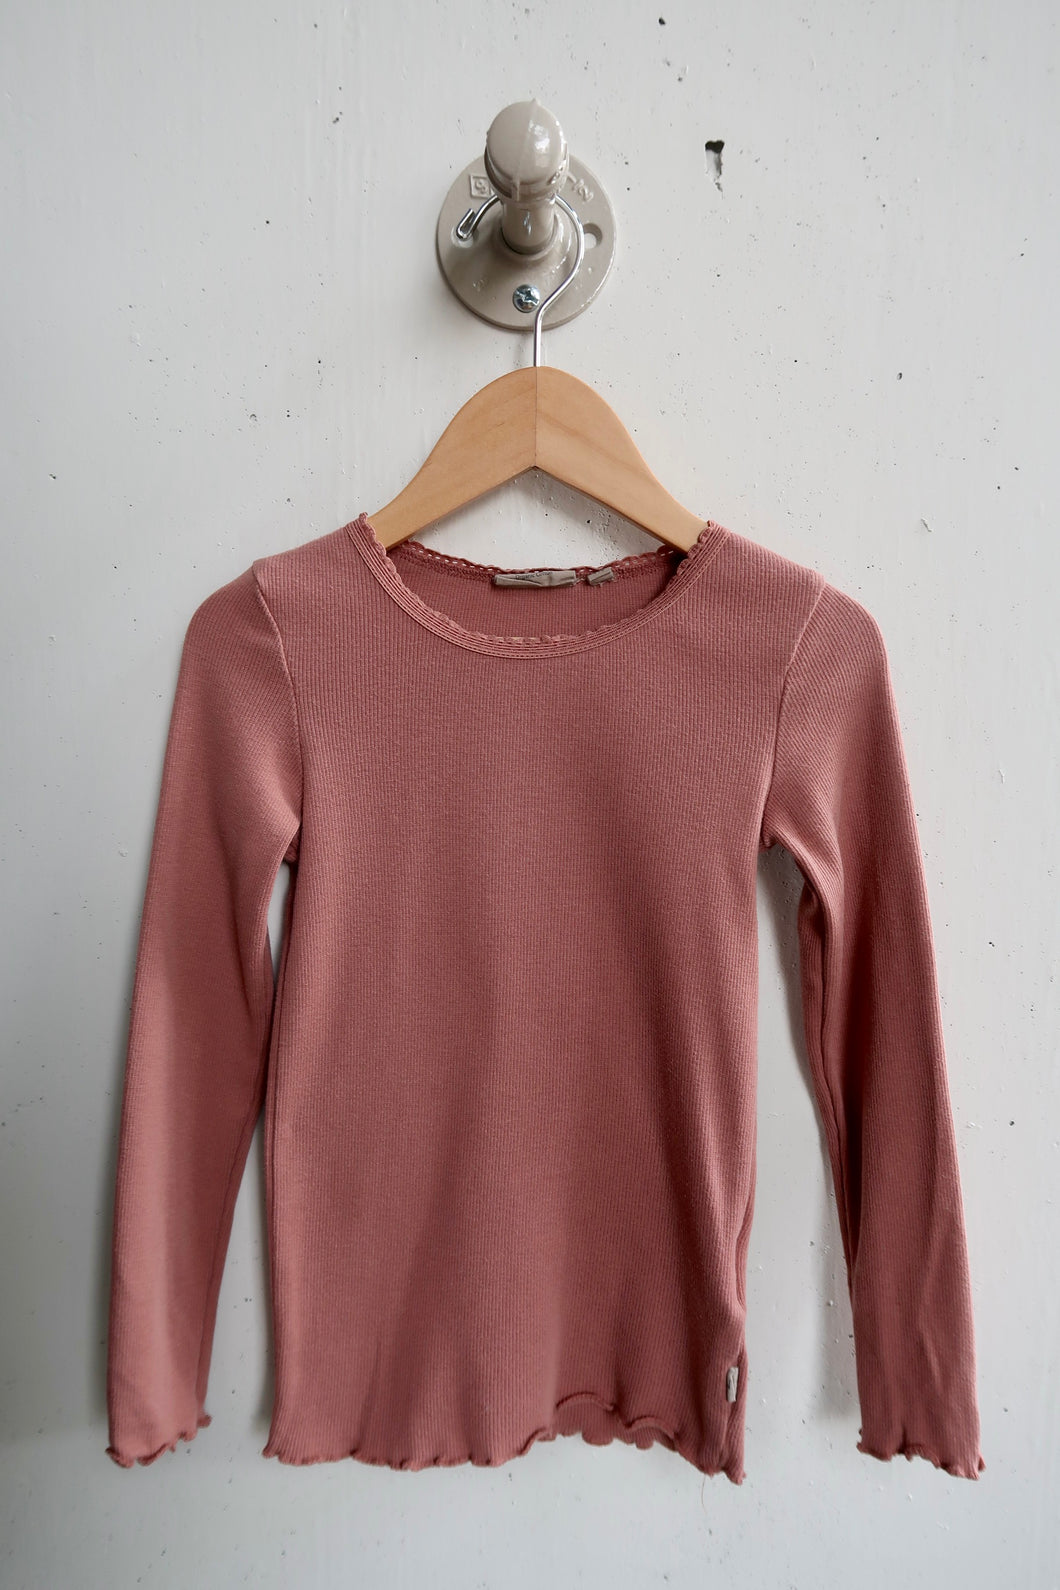 Wheat - Pink LS Top - Size 5 Years